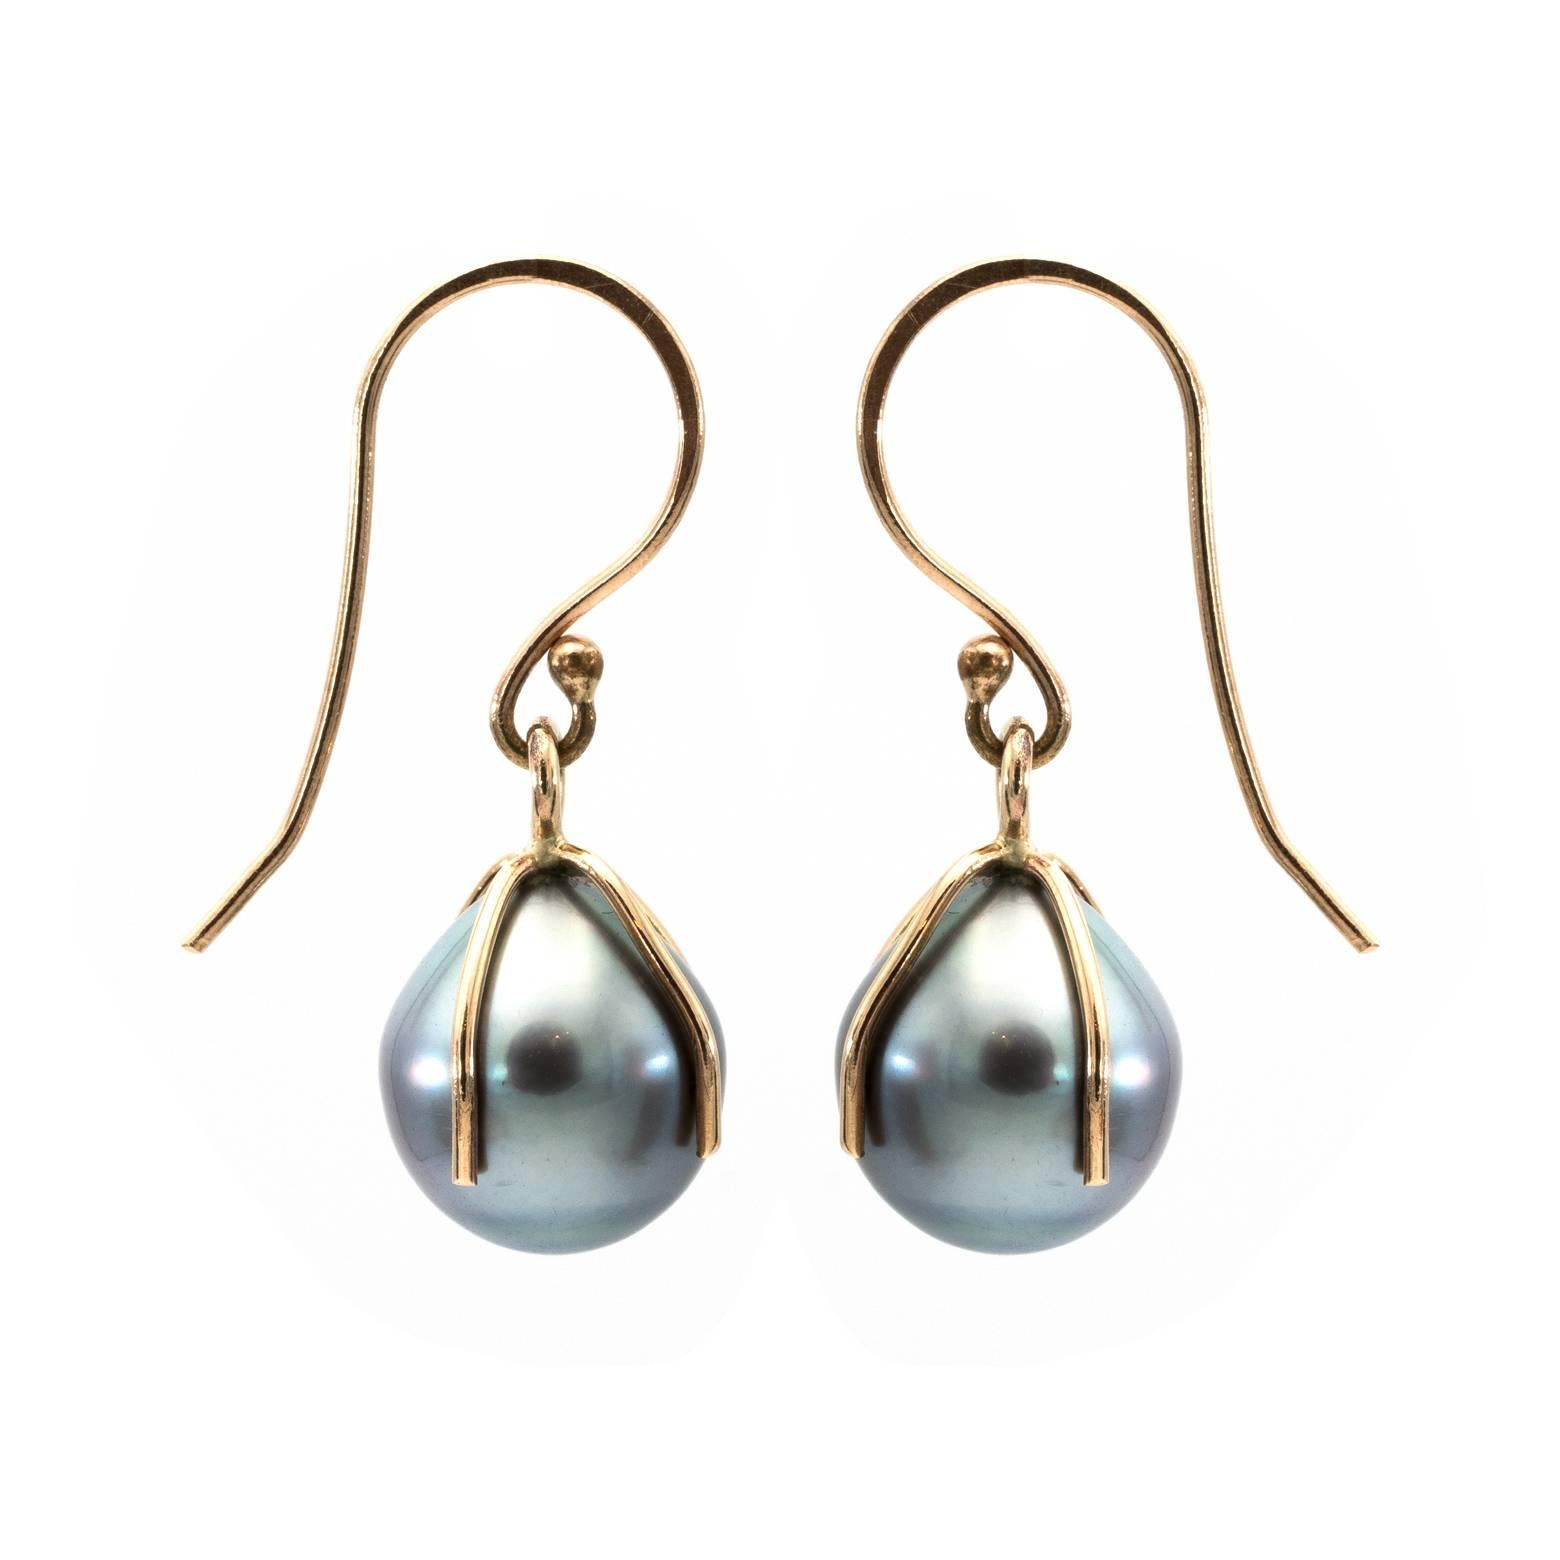 these simple but elegant Tahitian pearl earring have a modern 'leaf' motif that blend the earwire seamlessly..These are the perfect pair of everyday pearl earrings!!